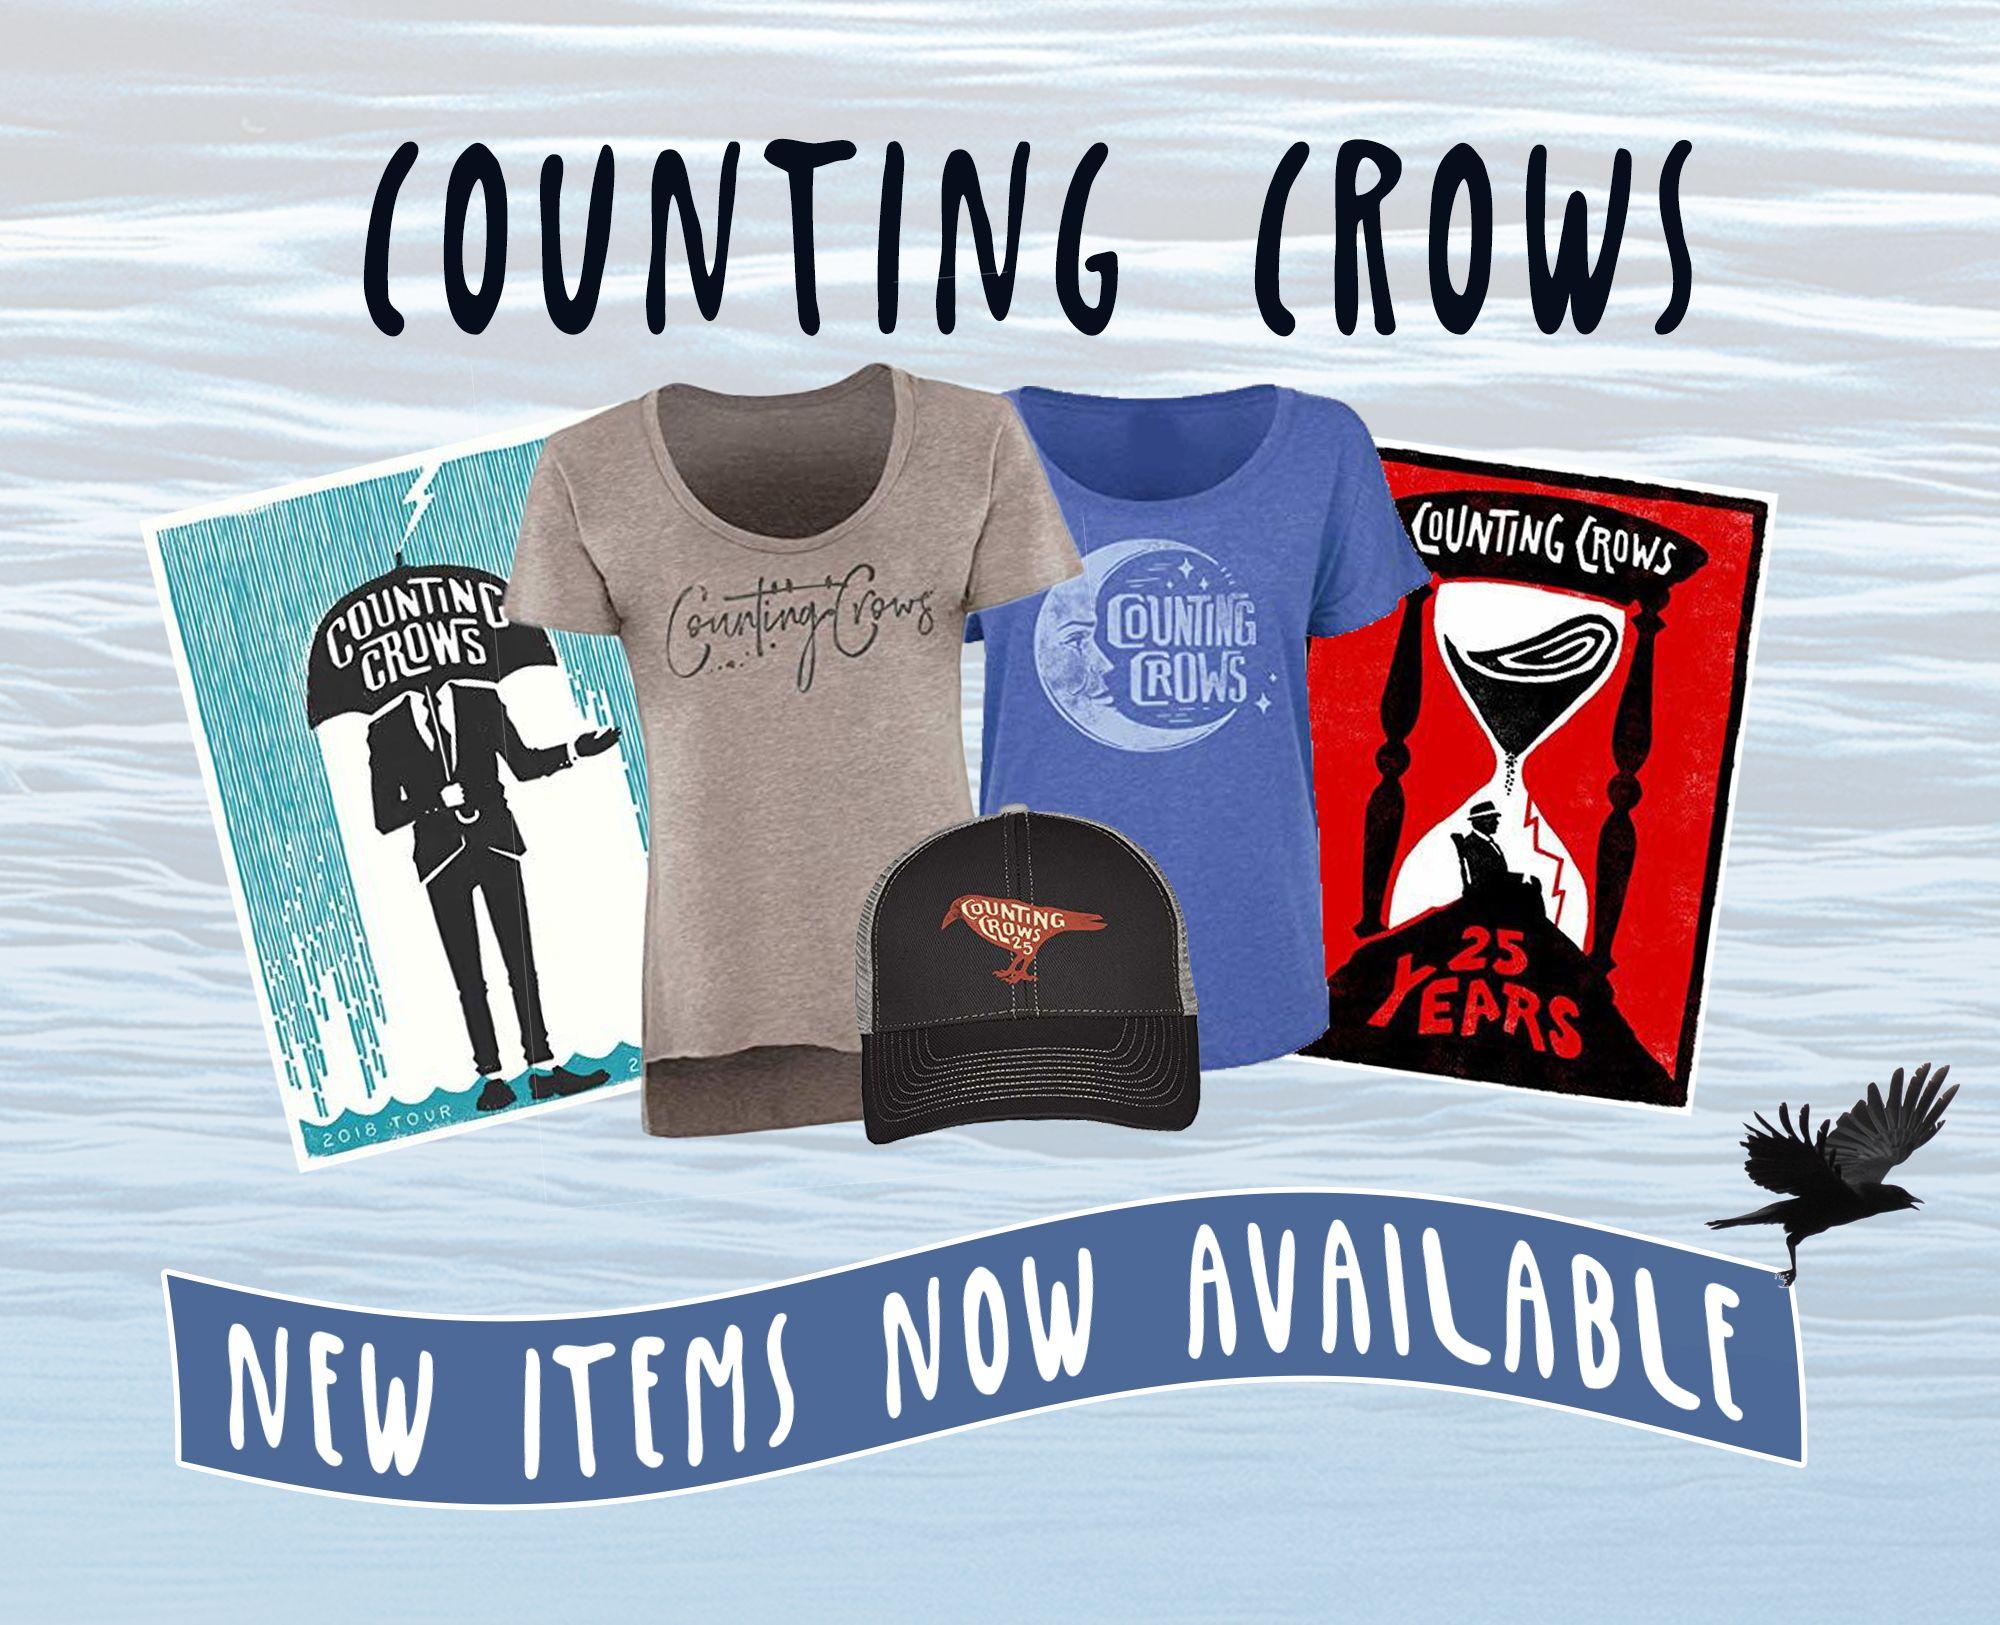 Counting Crows Logo - Counting Crows